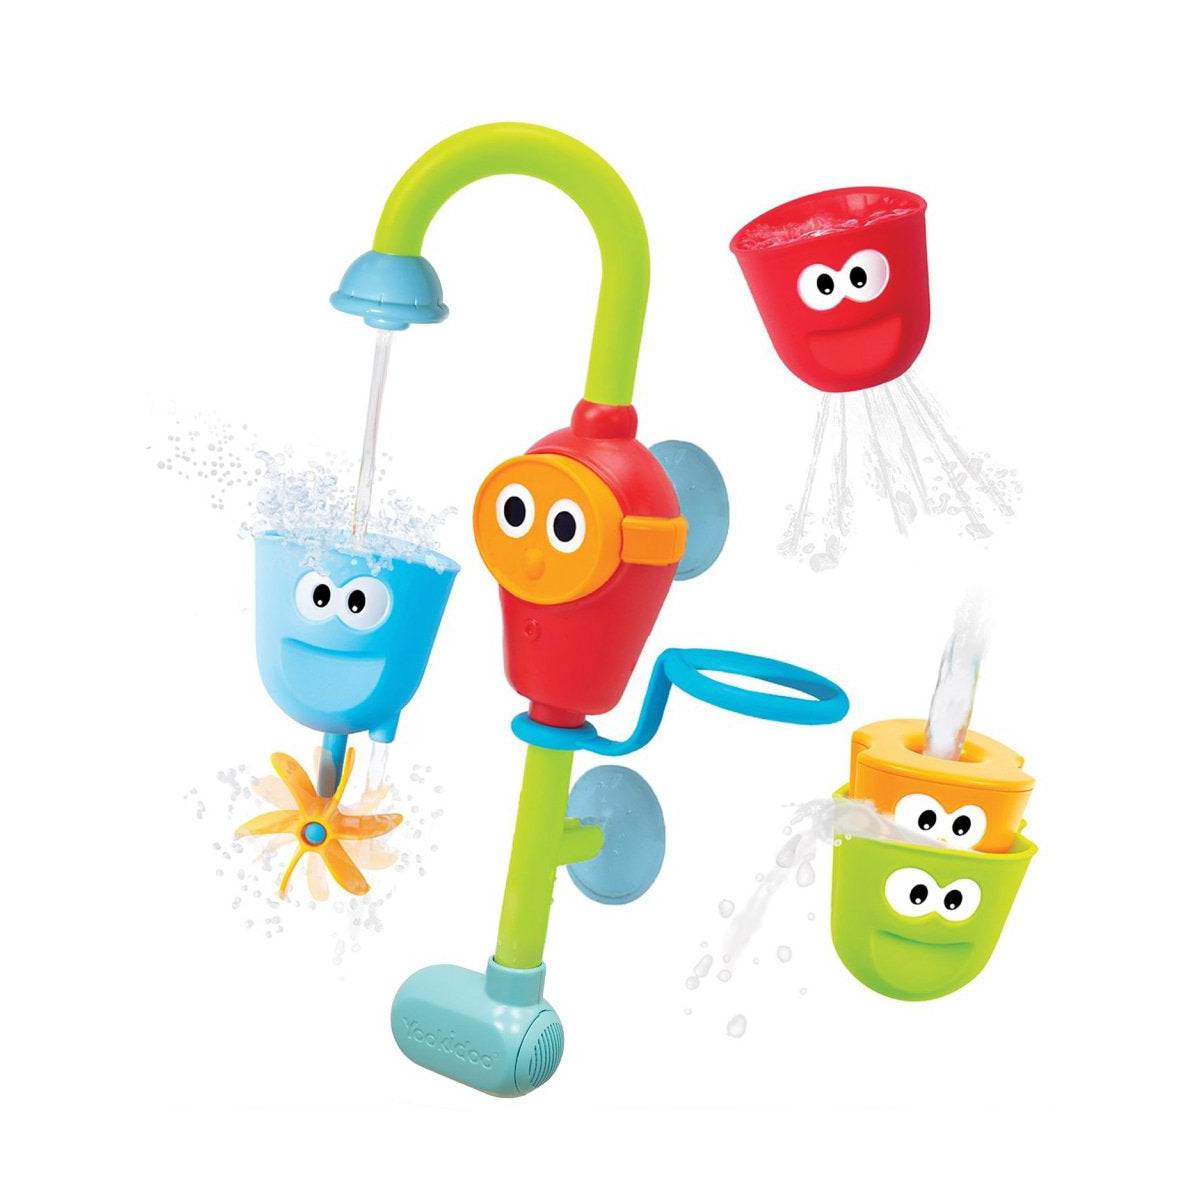 Flow N Fill Spout Bath Toy from Yookidoo